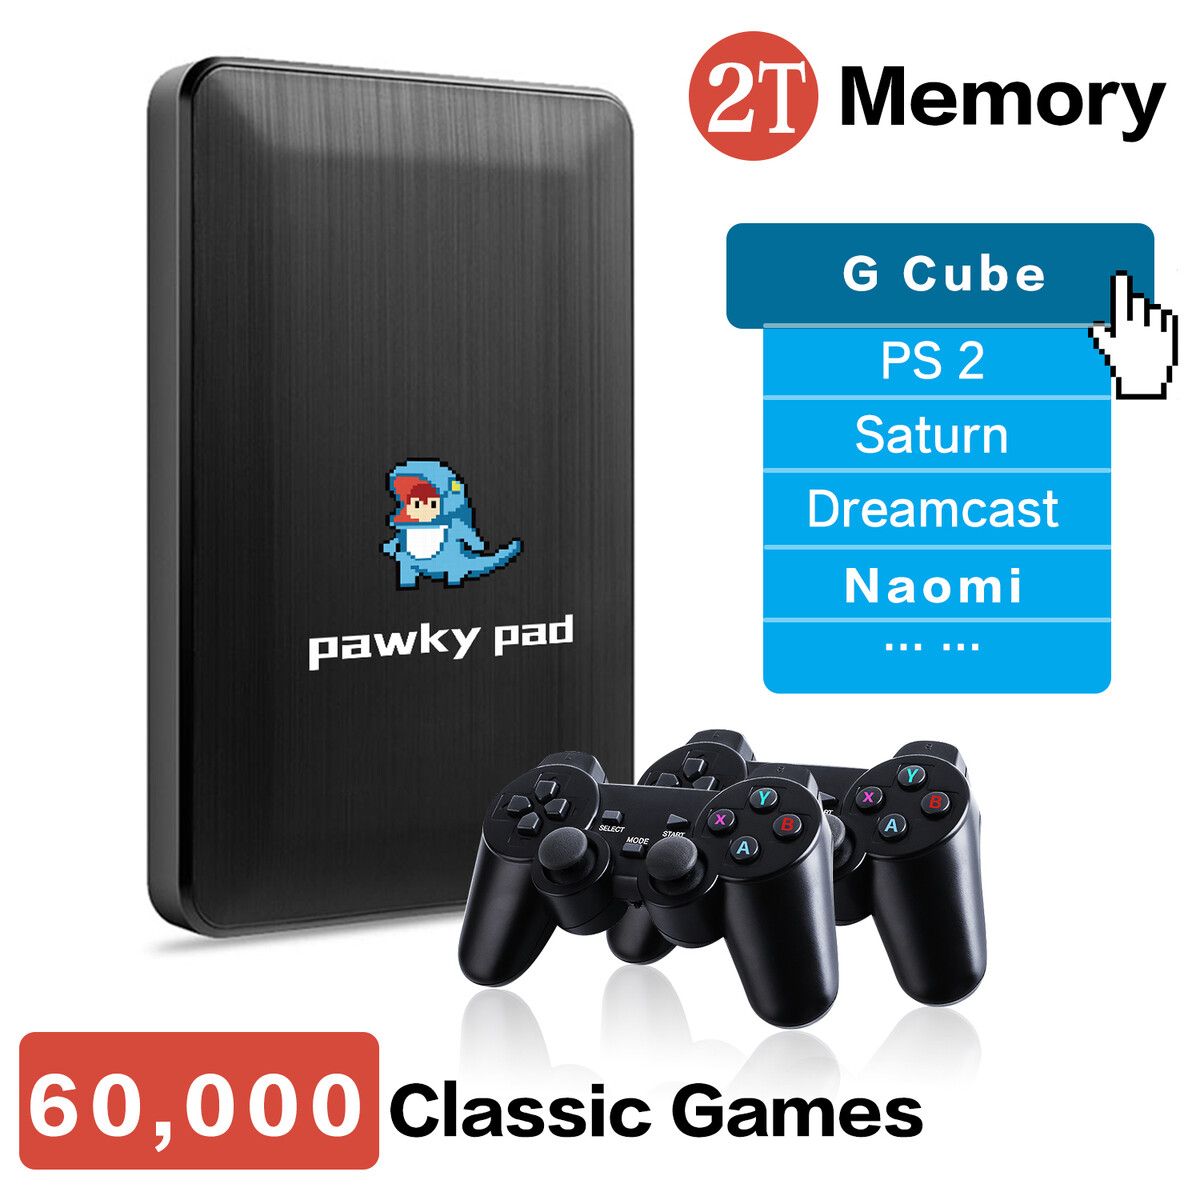 Retro Video Game Console With 120000 Game For PS3/PS2/PSP/PS1/X BOX/WII/Game